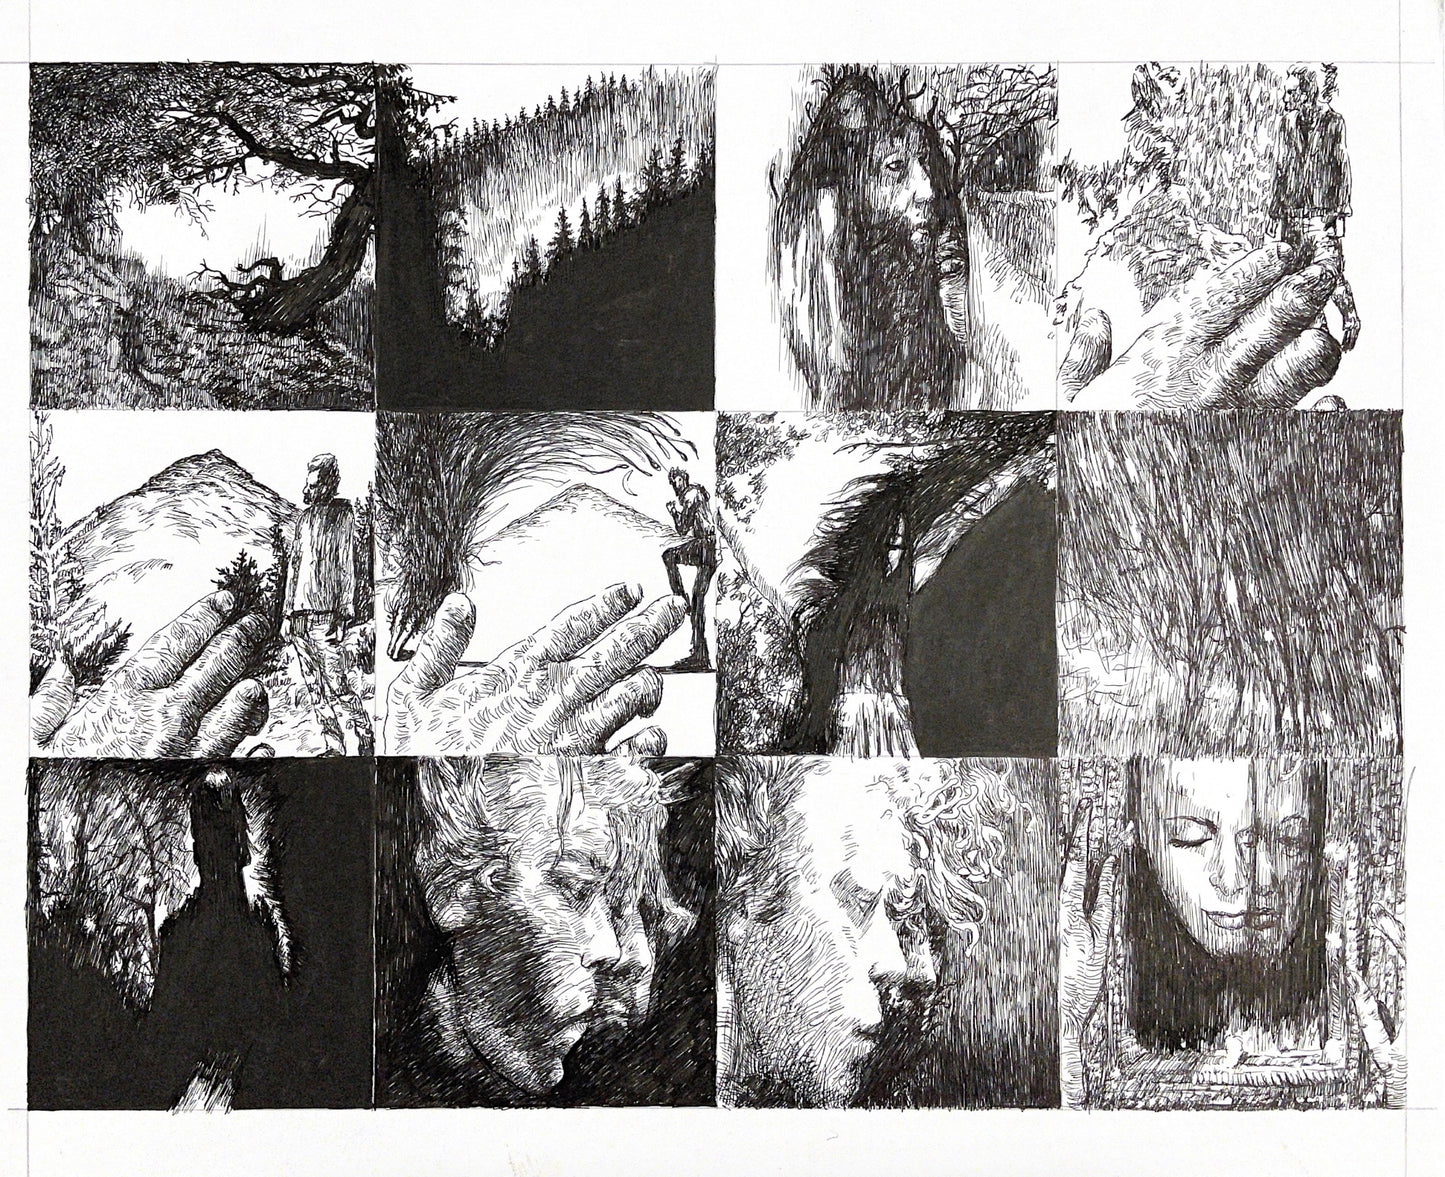 Graphic novel panels, featuring ink drawings, people, disoriented perspectives, woods and movement.